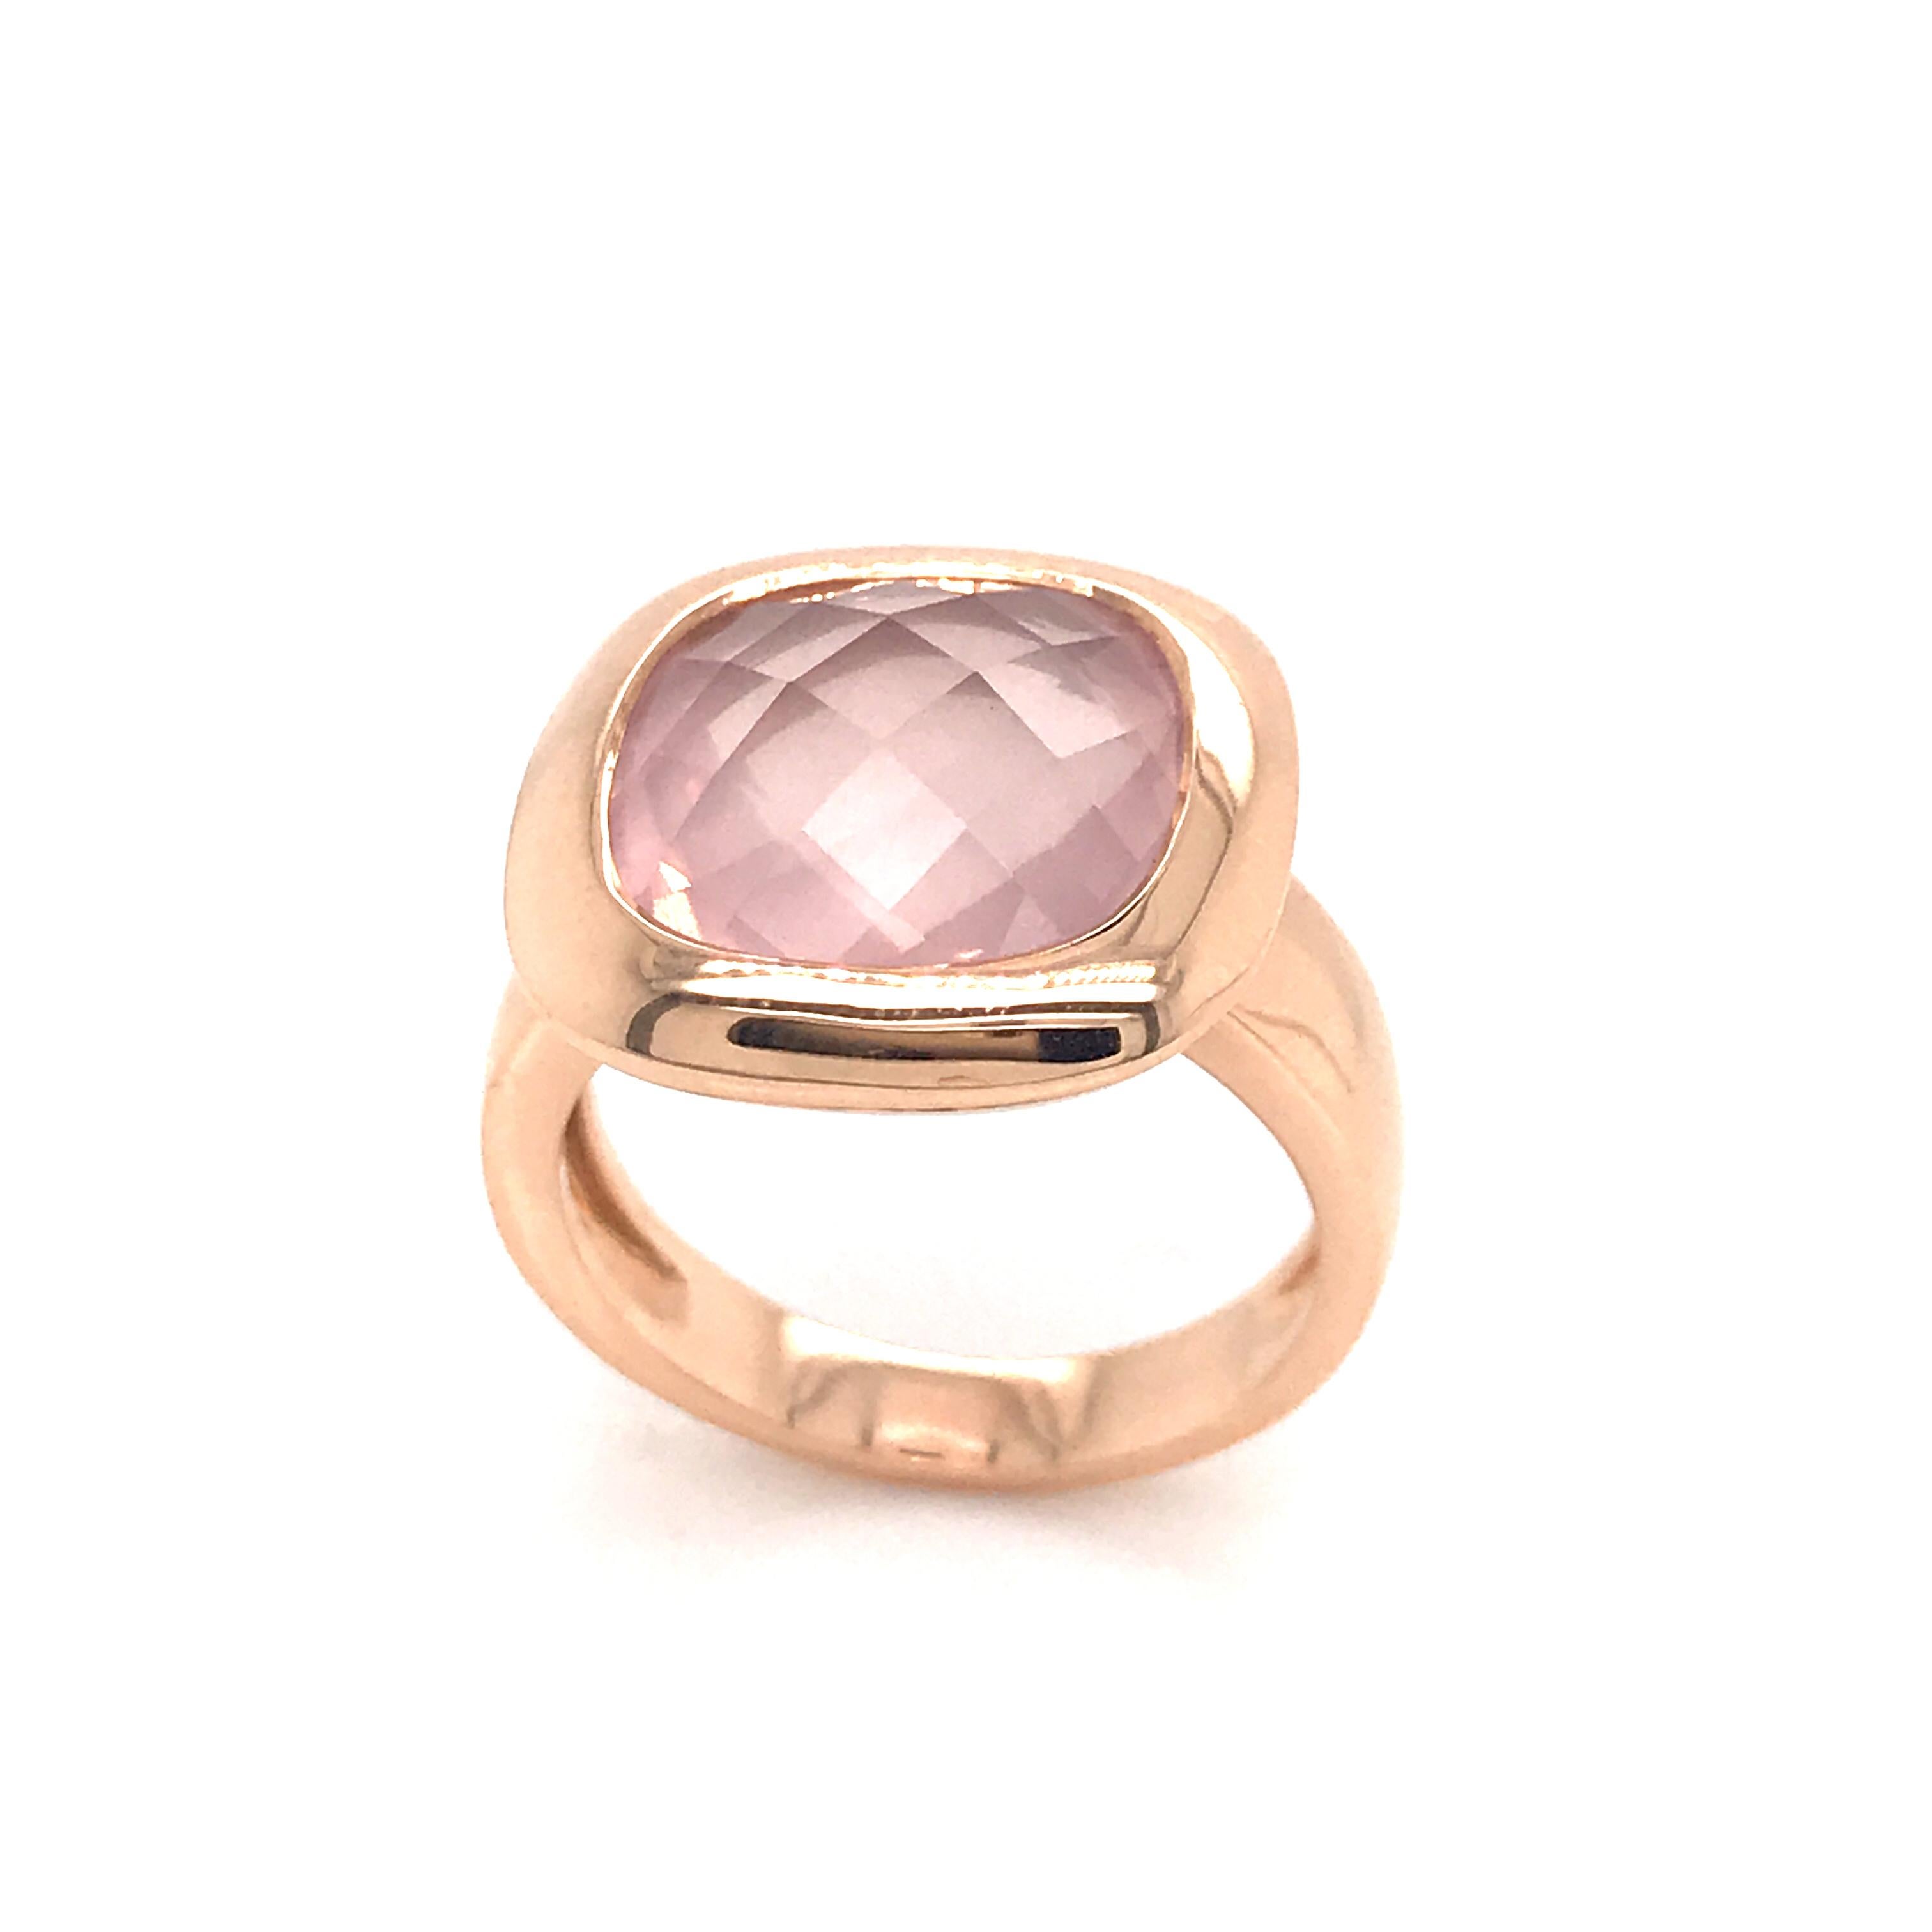 Pink Quartz and Rose Gold 18k Fashion Ring 
Pink Quartz Briolette Cut width 12 mm length 12 mm 
Us Size / 7
French Size / 53
Rose Gold 18 k weight 9.55